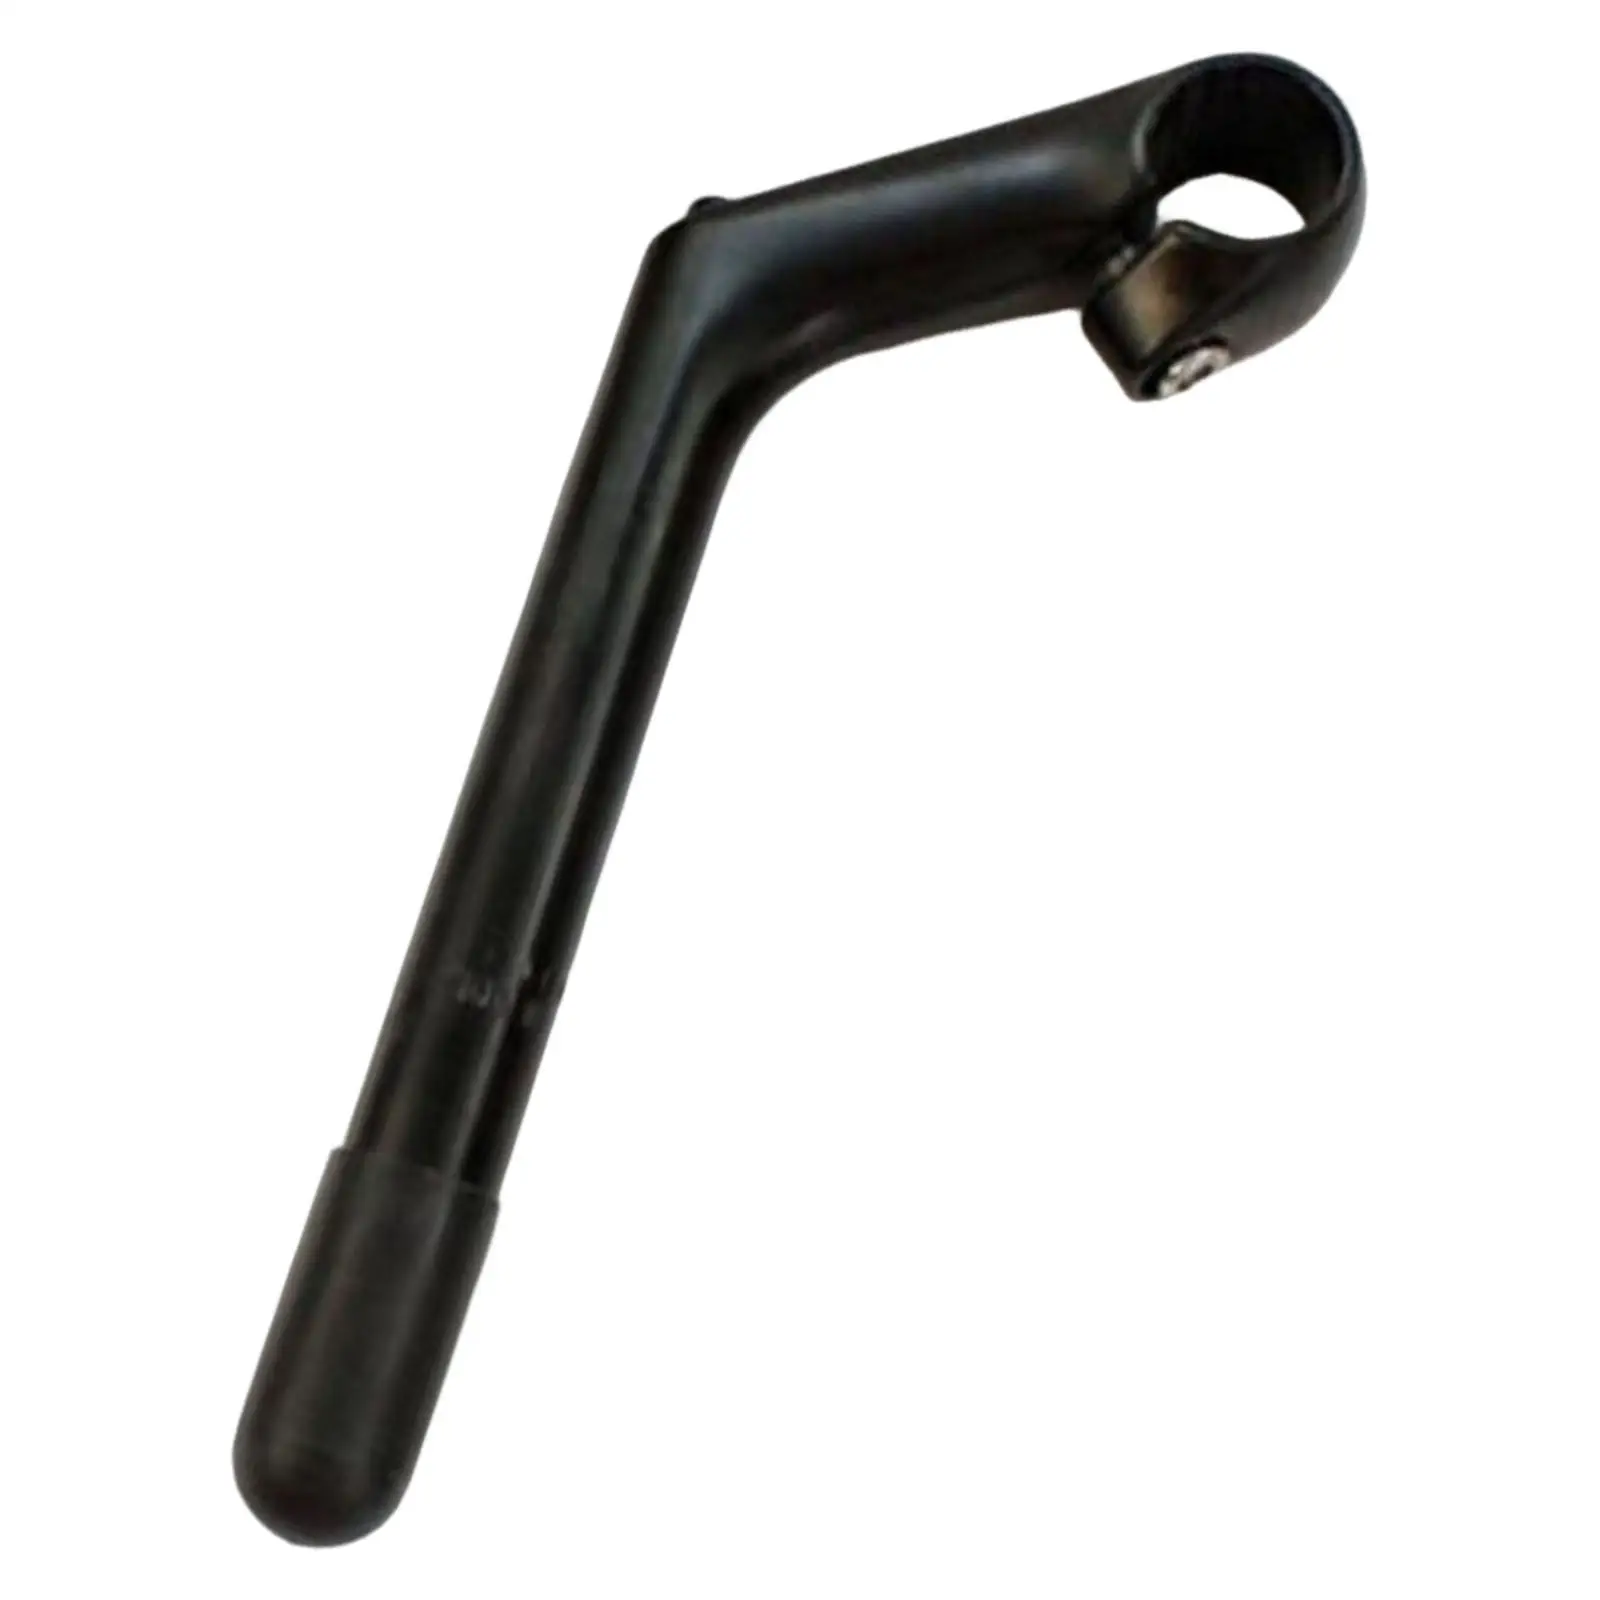 Handle Bar Stem Lightweight Heavy Duty Bicycle Quill Stem for Comfort Bikes